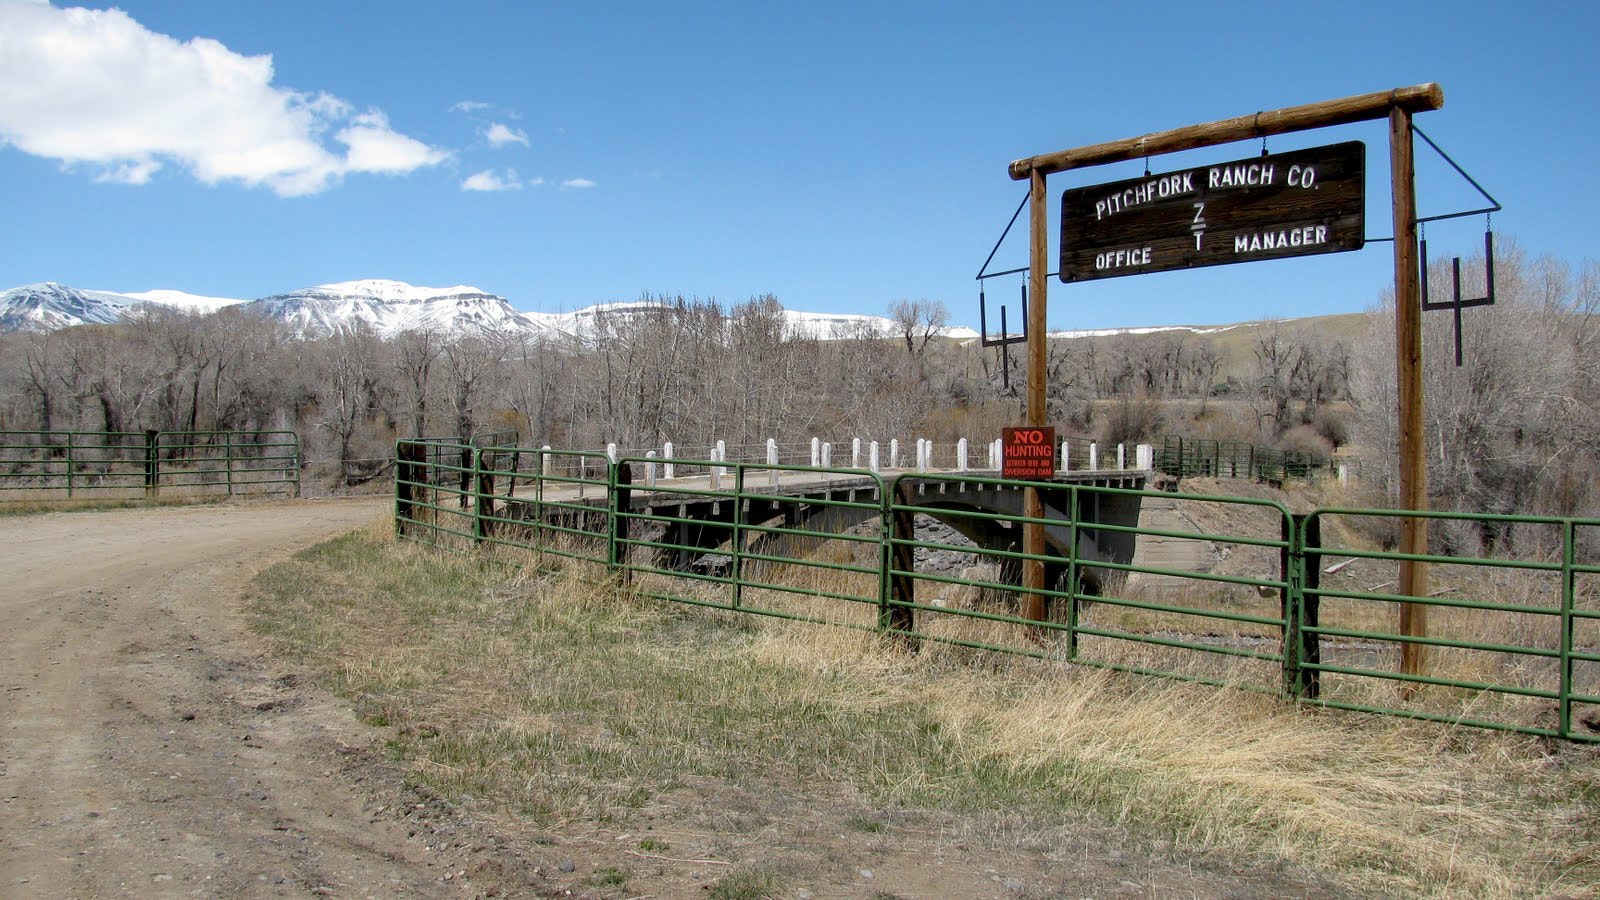 The Pitchfork Ranch has been around in Wyoming since 1878. Now a Texas ranch with the Pitchfork name founded in 1883 is suing for it.